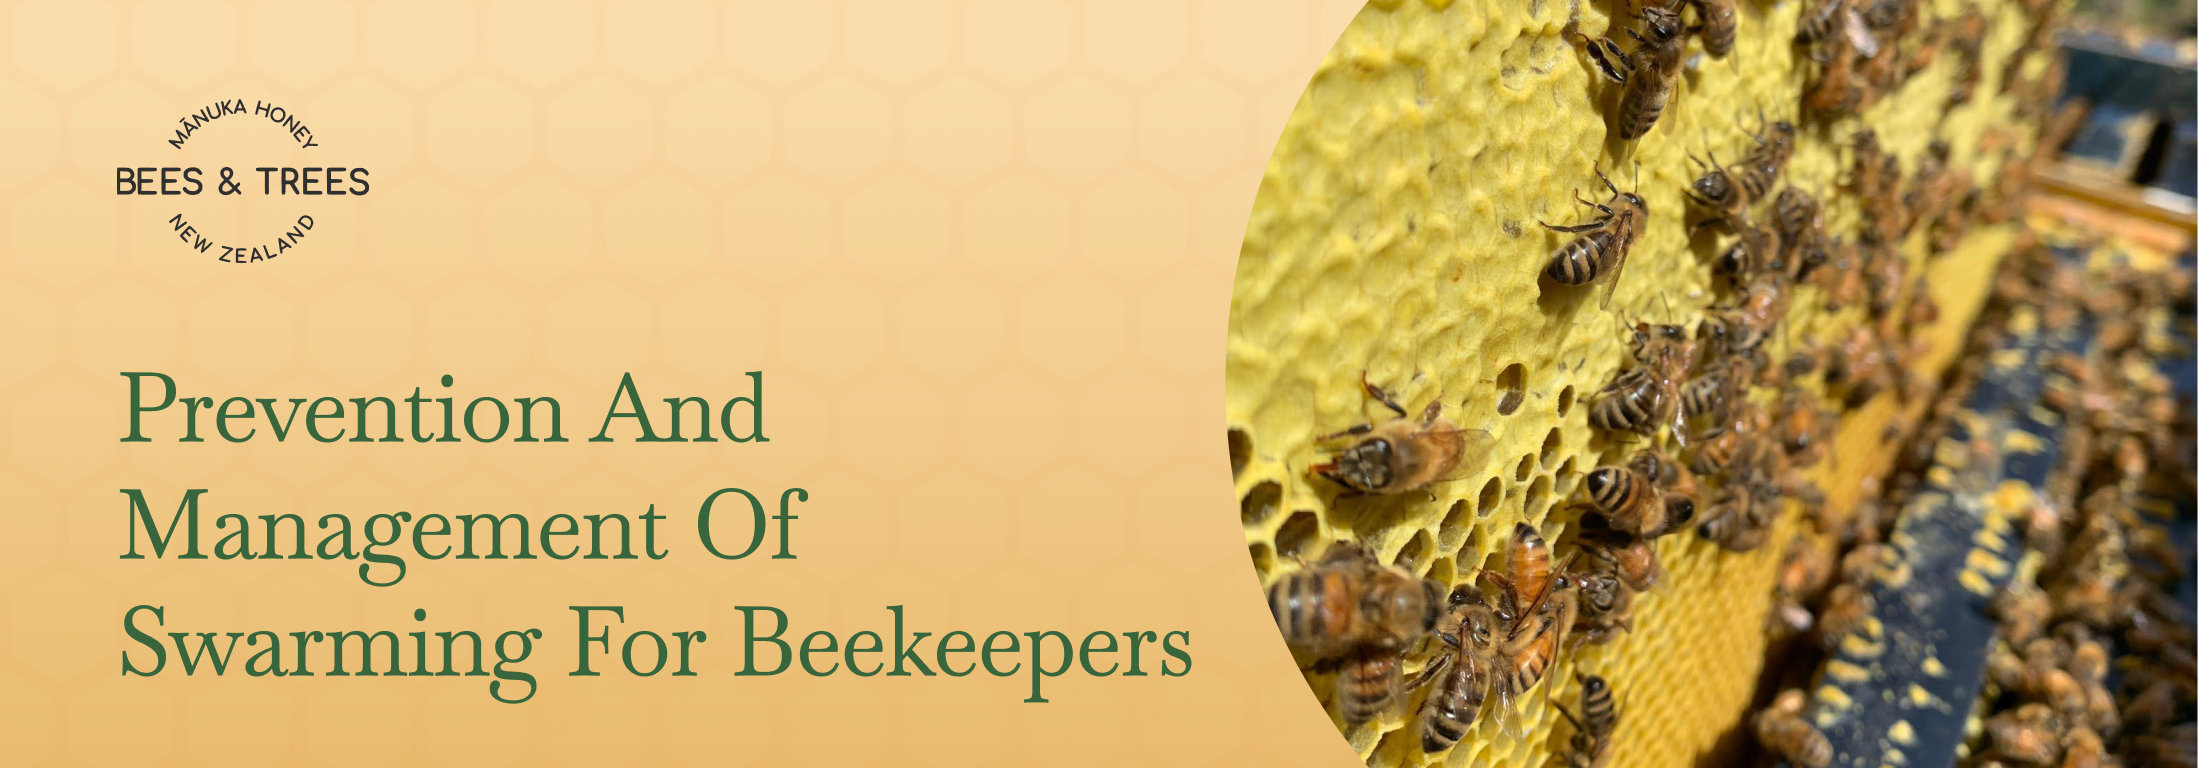 Prevention and Management of Swarming for Beekeepers